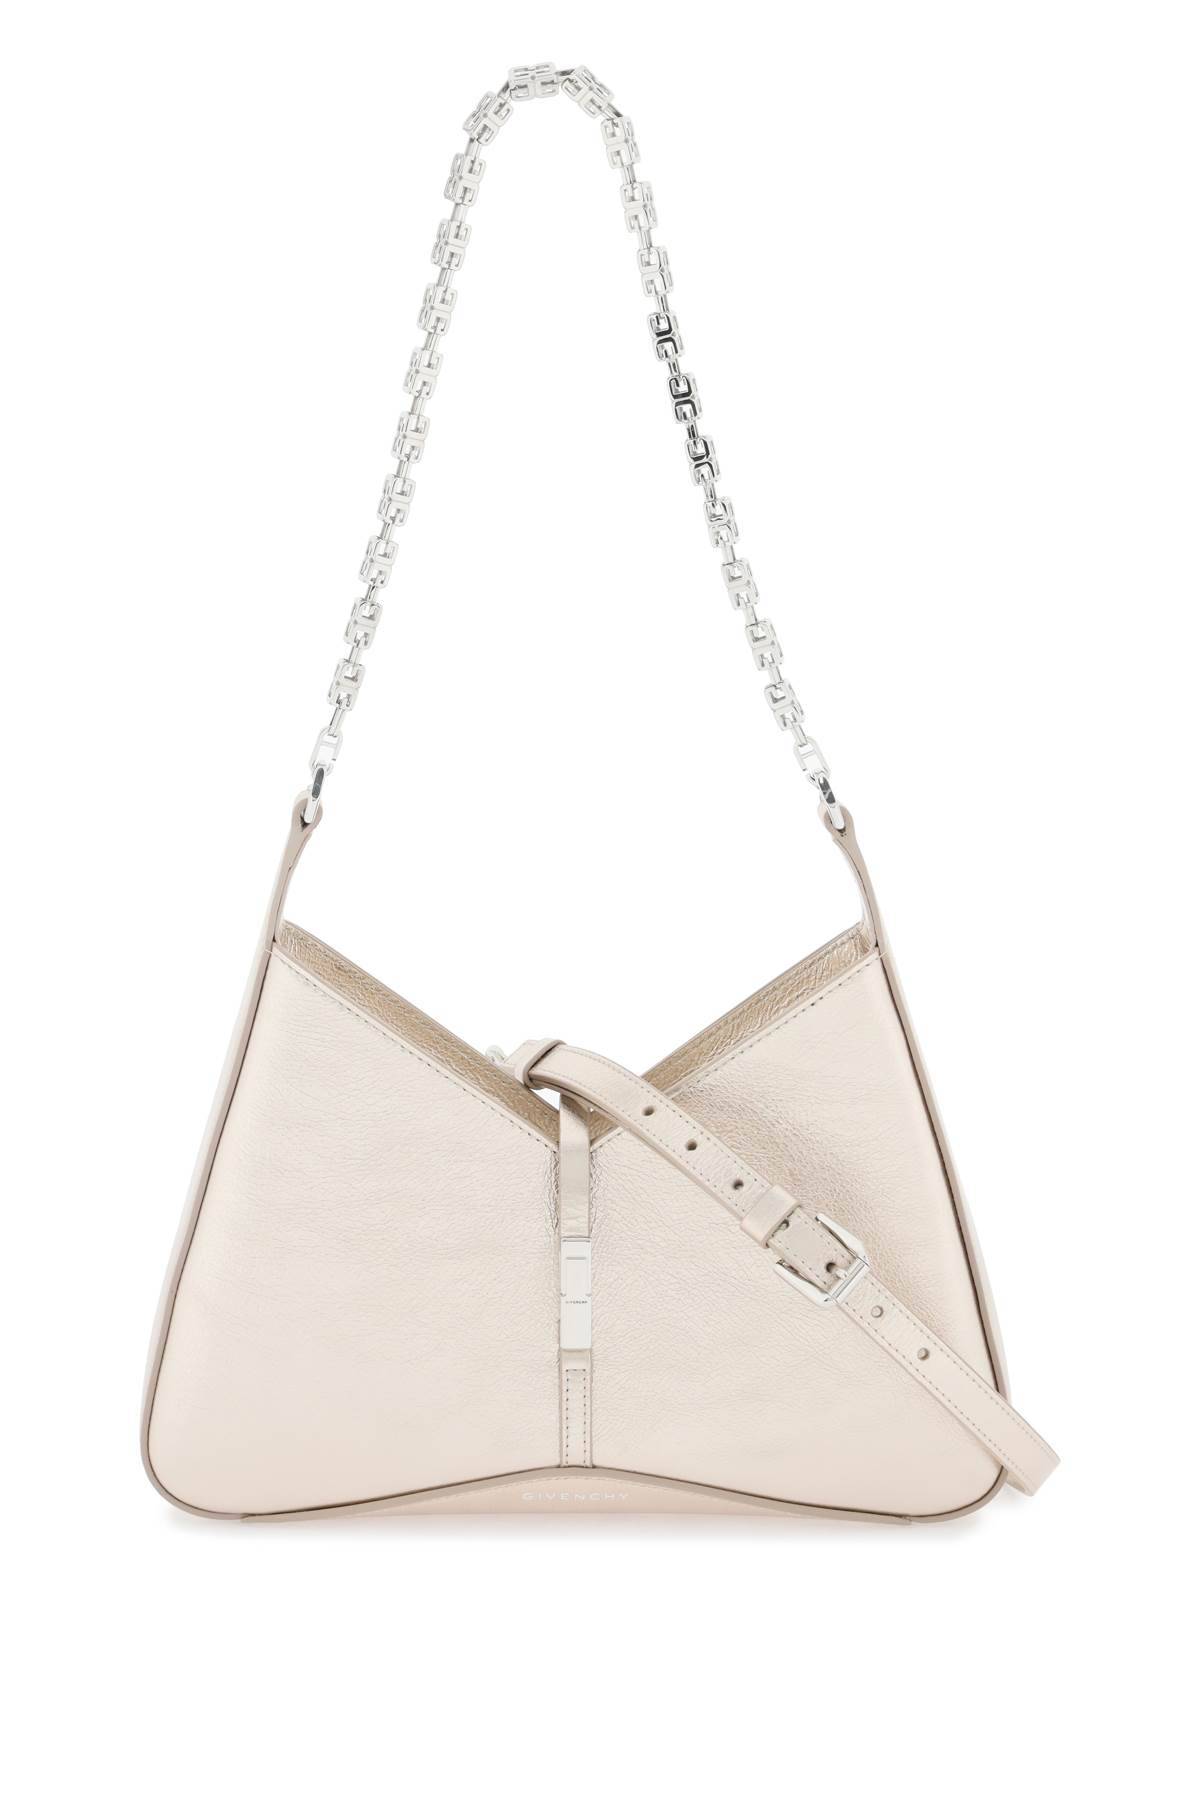 Givenchy GIVENCHY cut out small bag